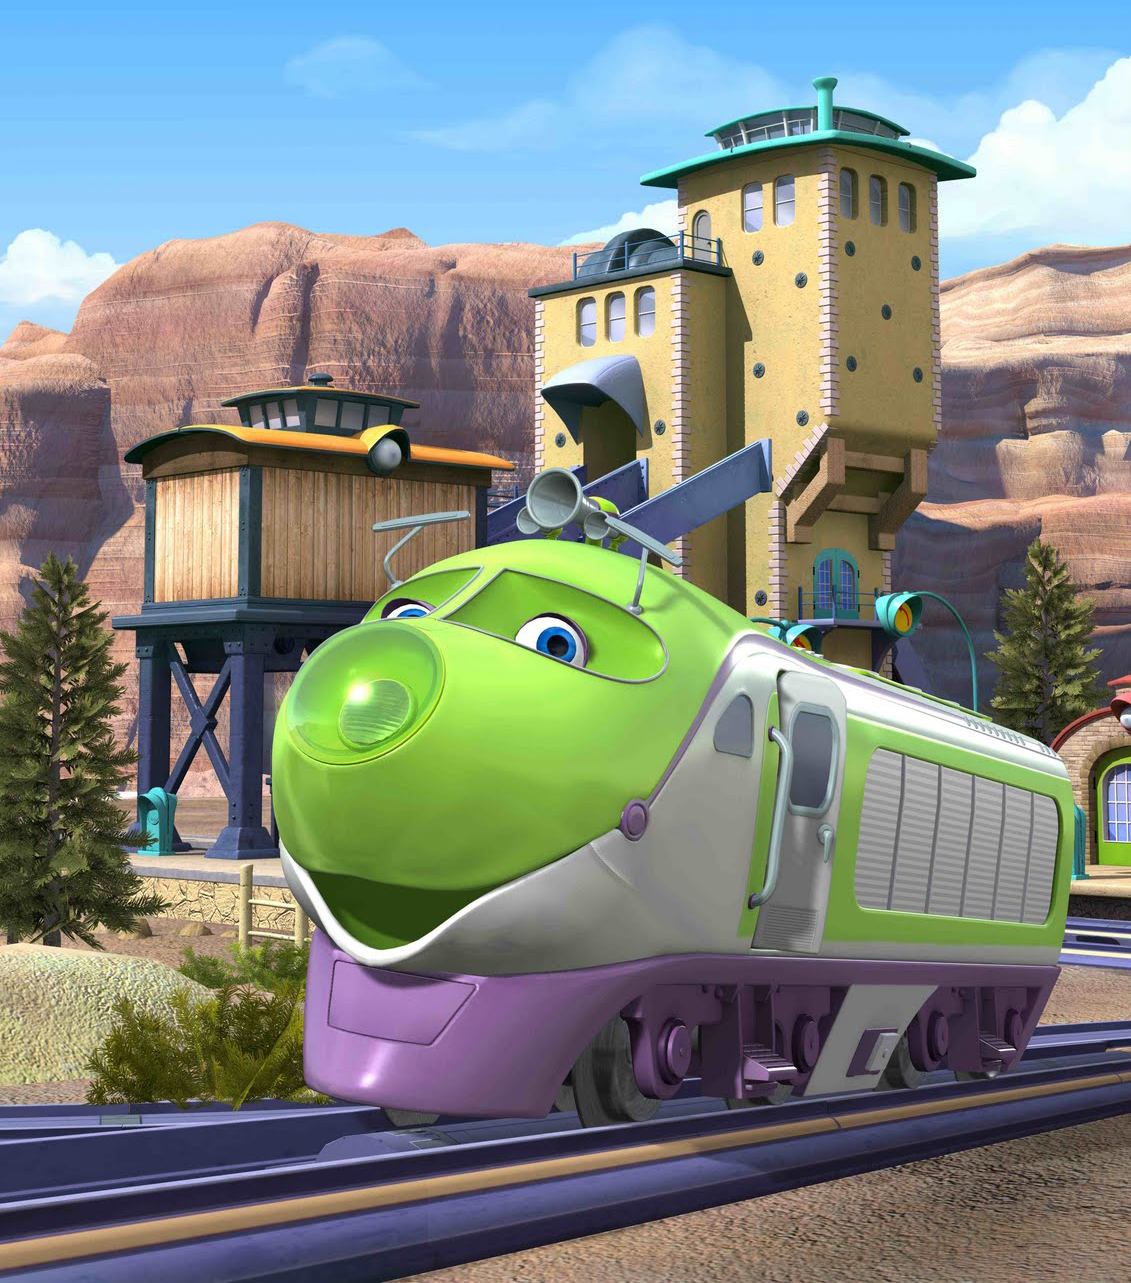 Koko from Chuggington. Brigid plays her voice on the US version airing daily on the Disney Channel